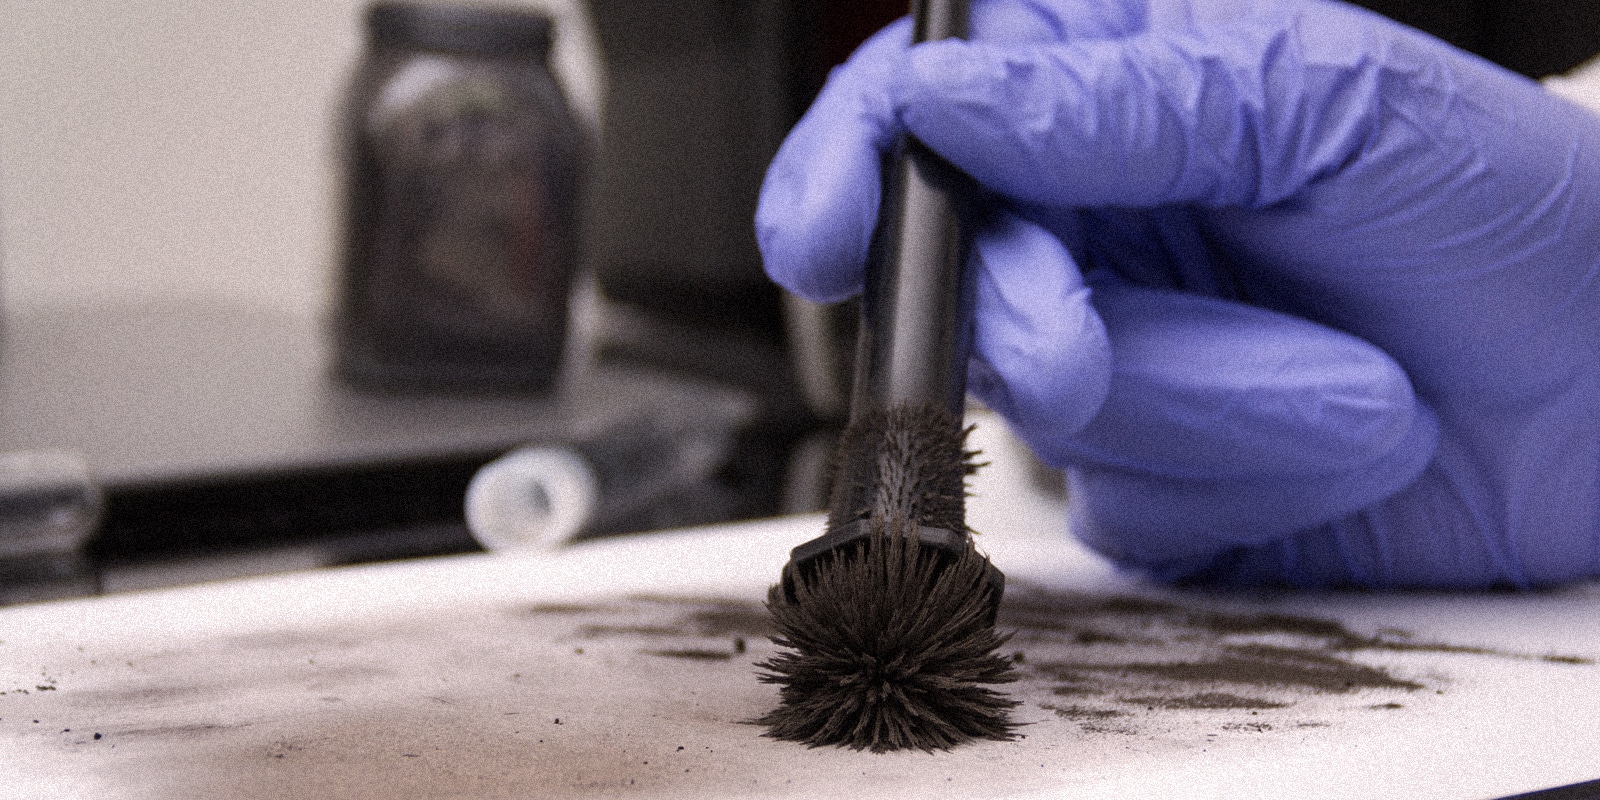 An image of a forensic scientist brushing for prints